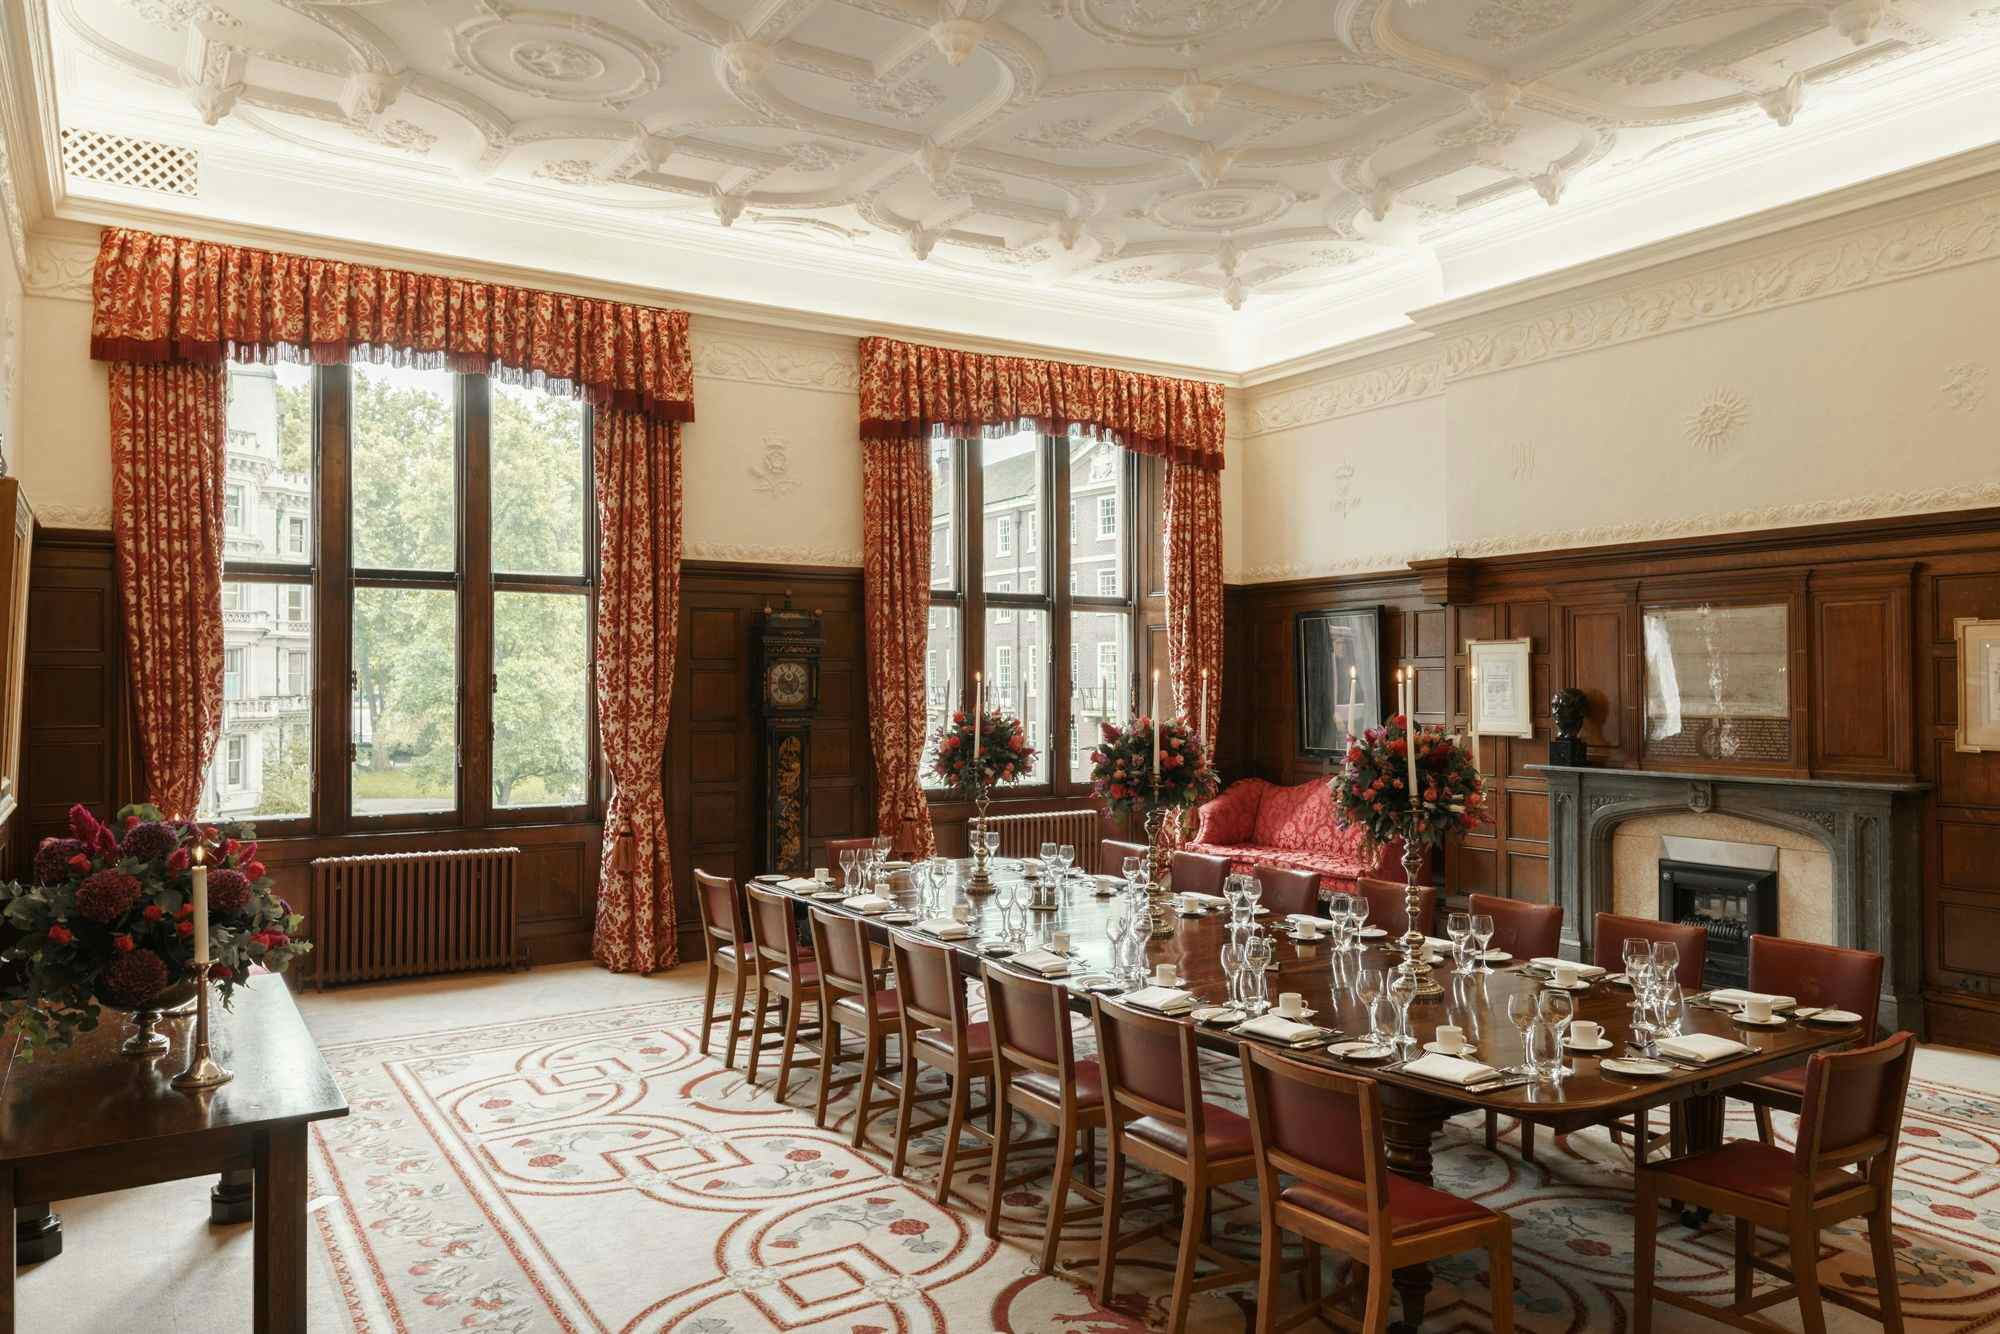 Queen's Room, Middle Temple, Middle Temple